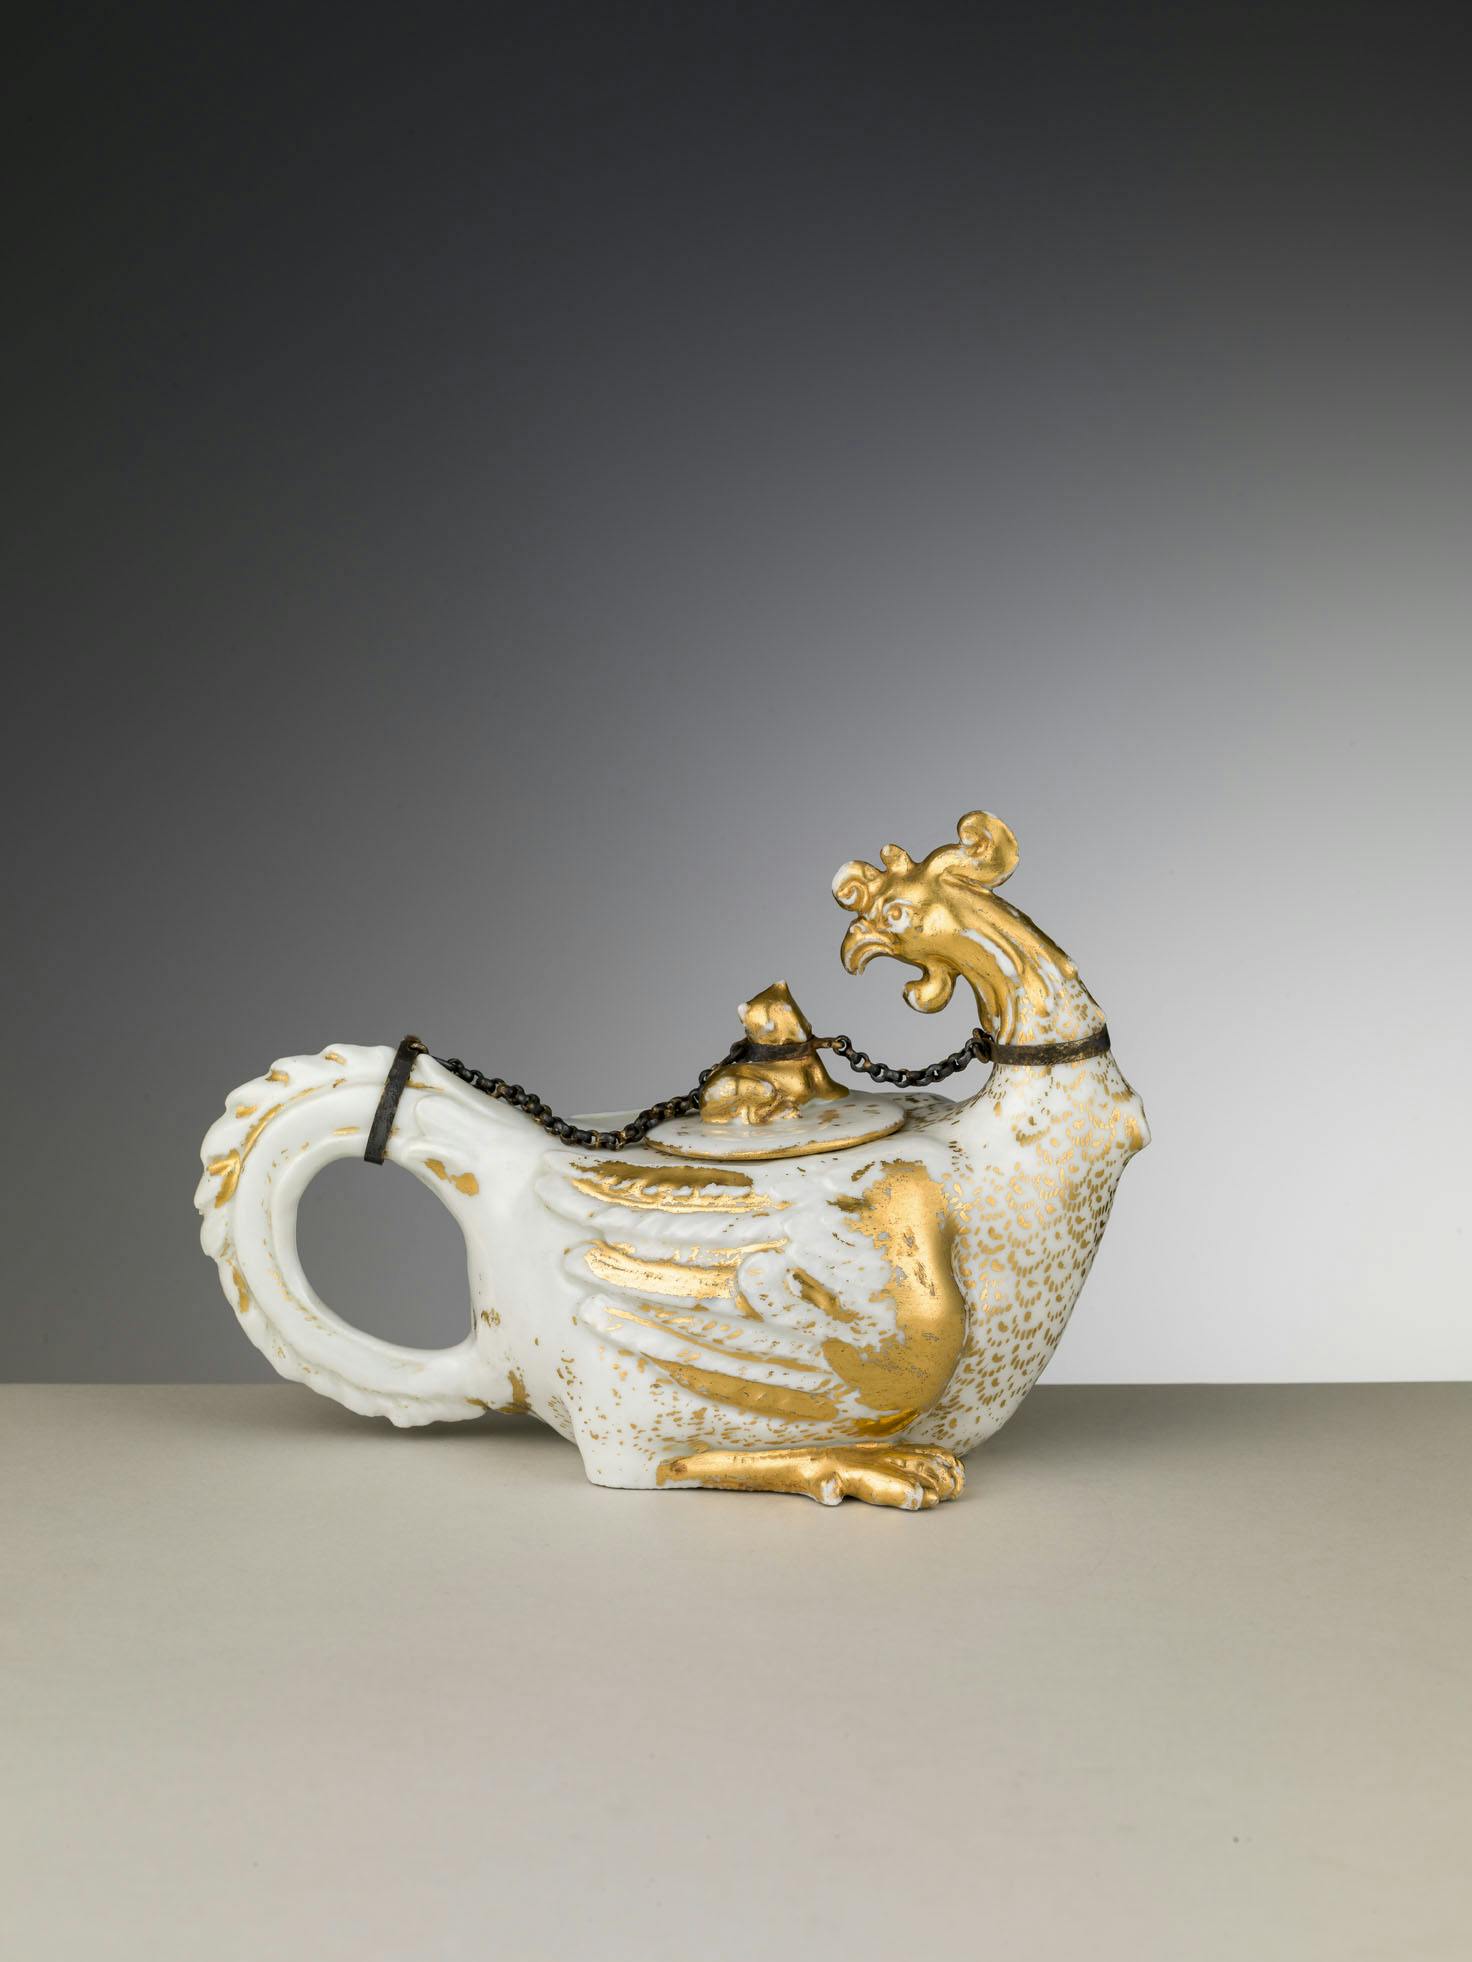 Teapot in the shape of a fantasy animal